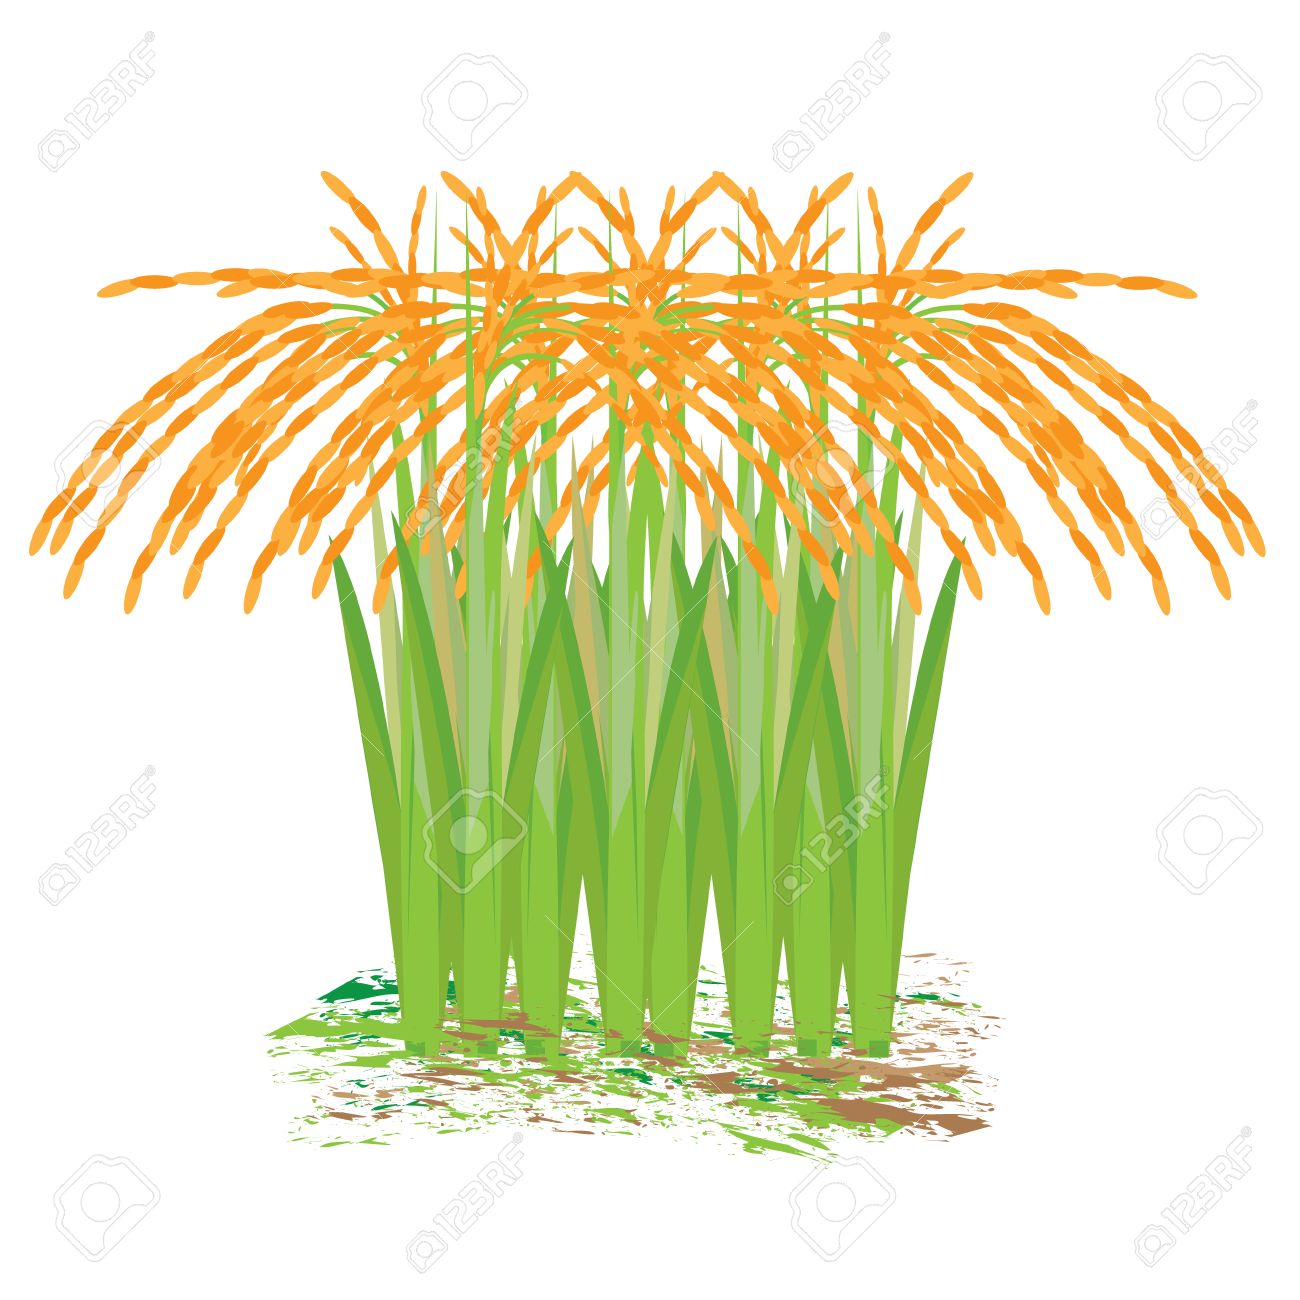 Paddy crop clipart